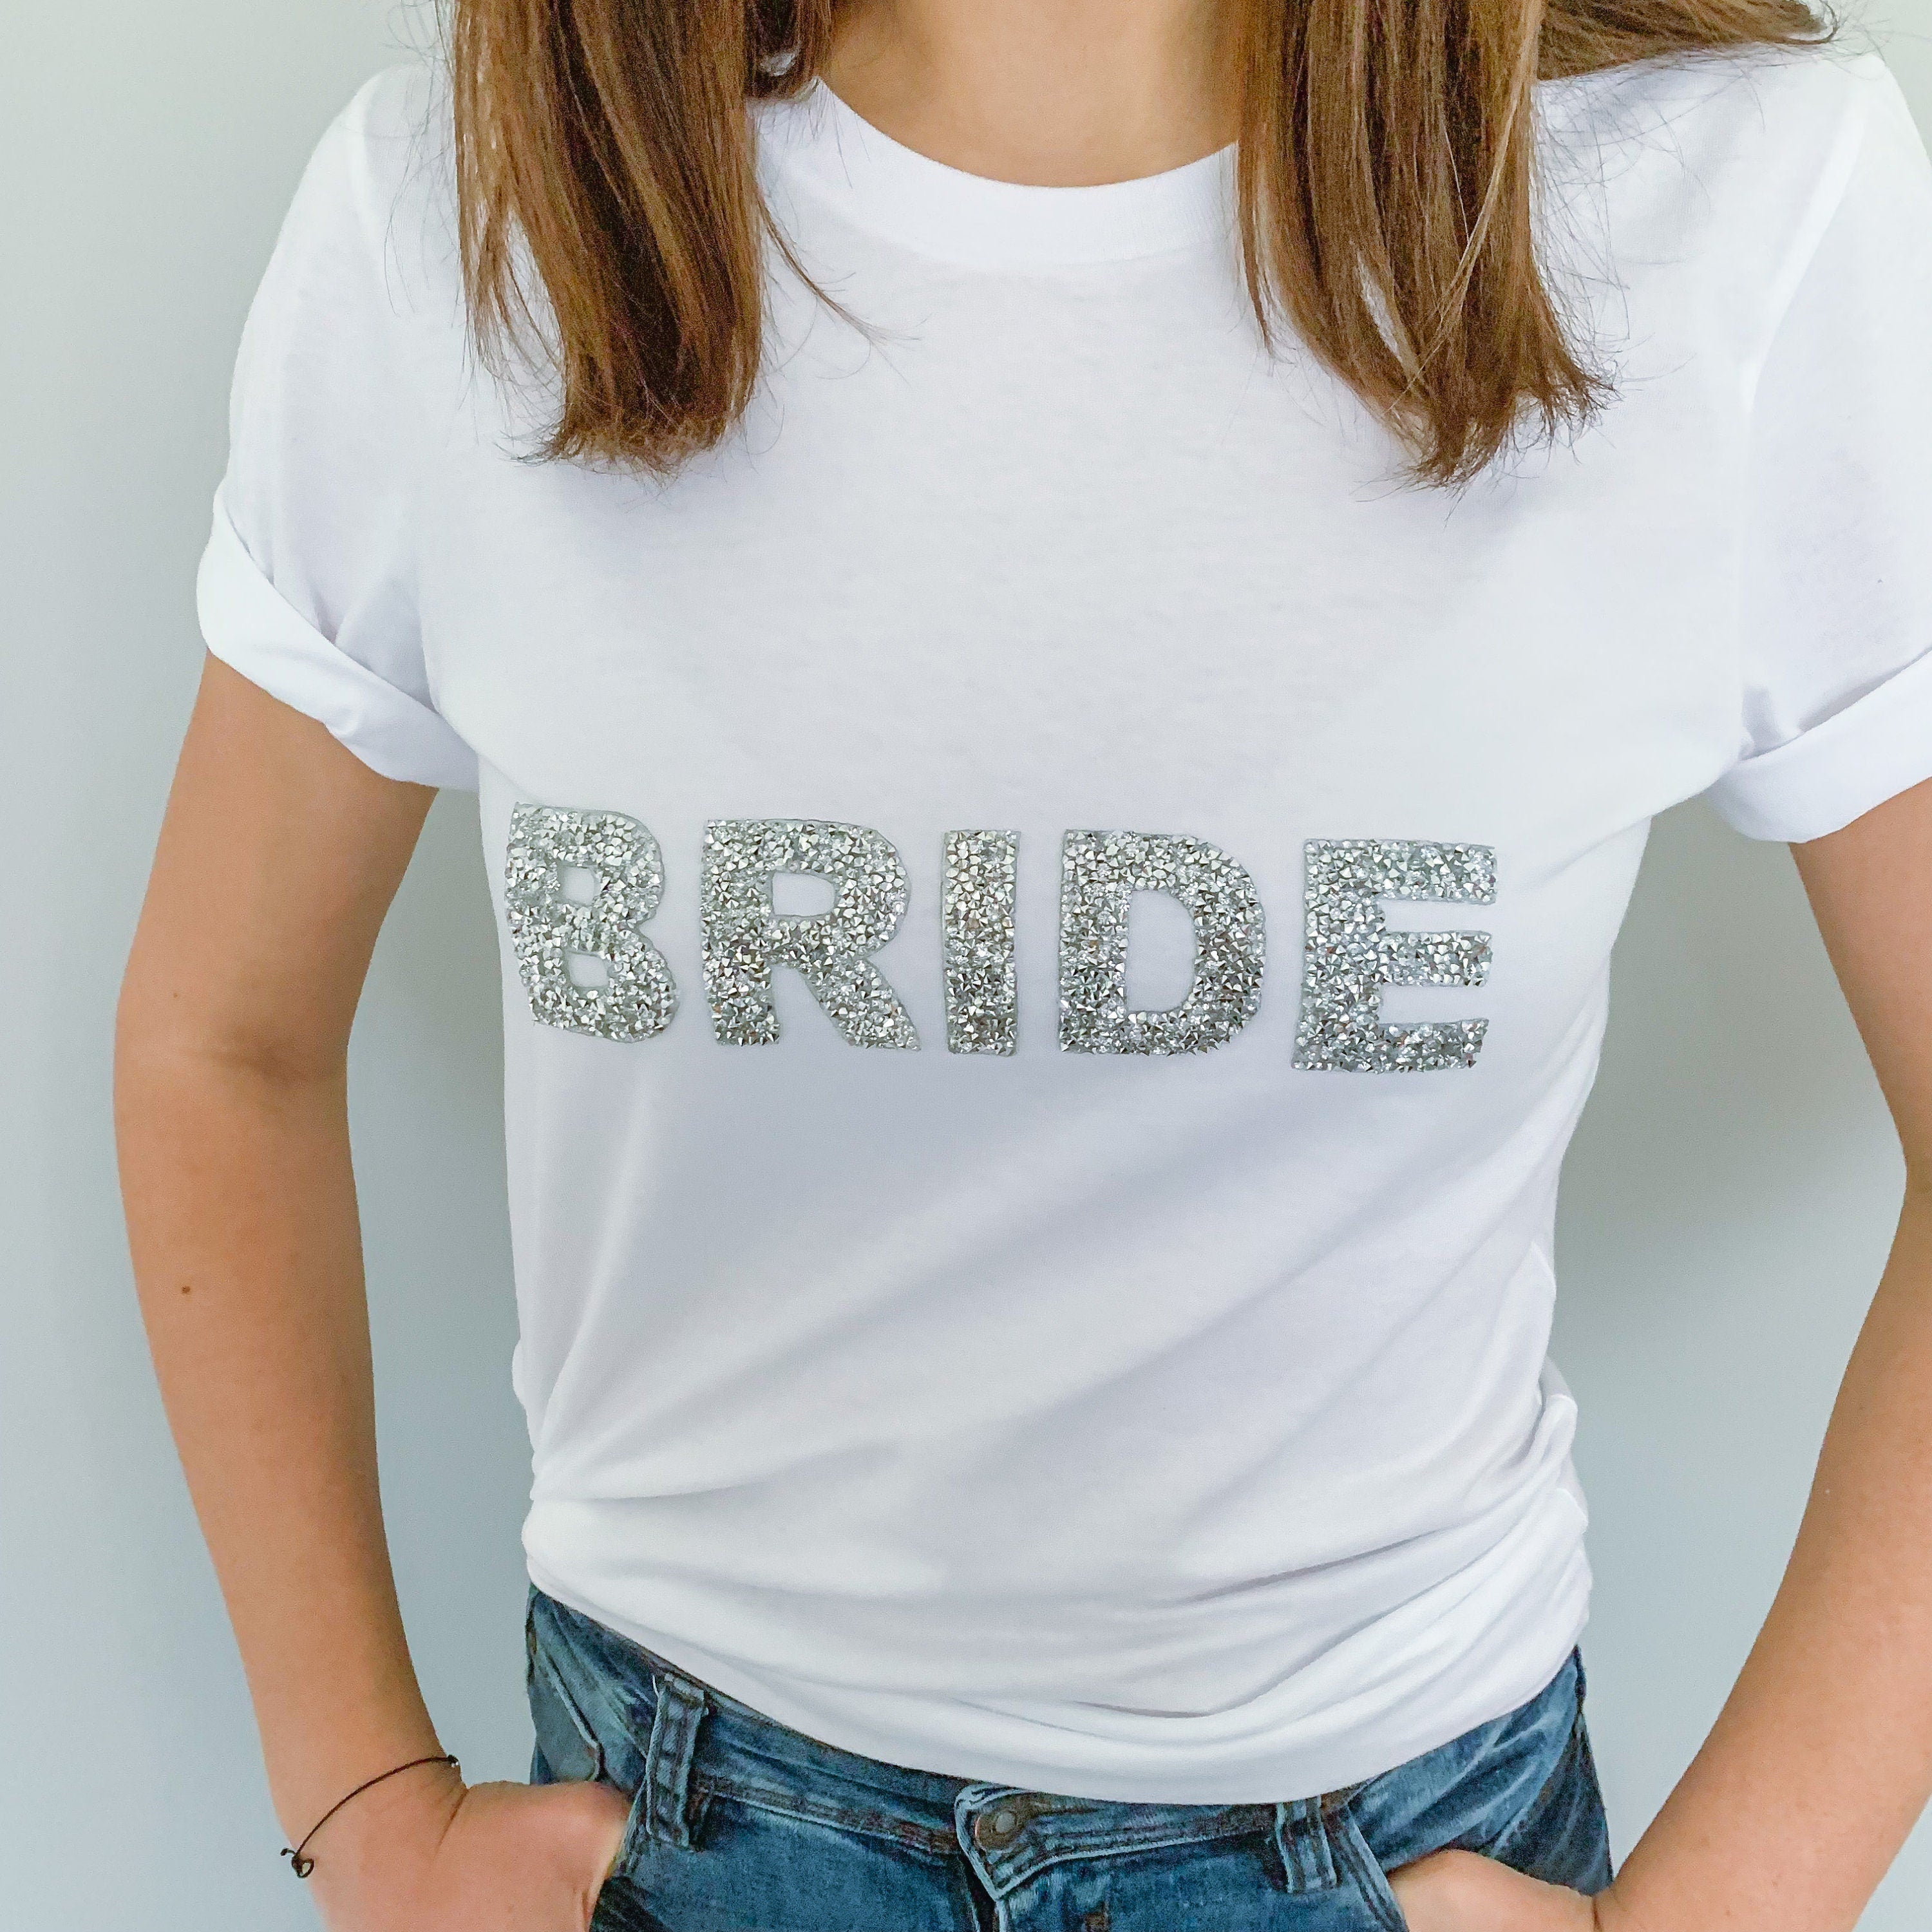 Bride T-Shirt With Sparkly Rhinestone Letters, Bridal Shower Engagement Gift, Bride To Be Shirt